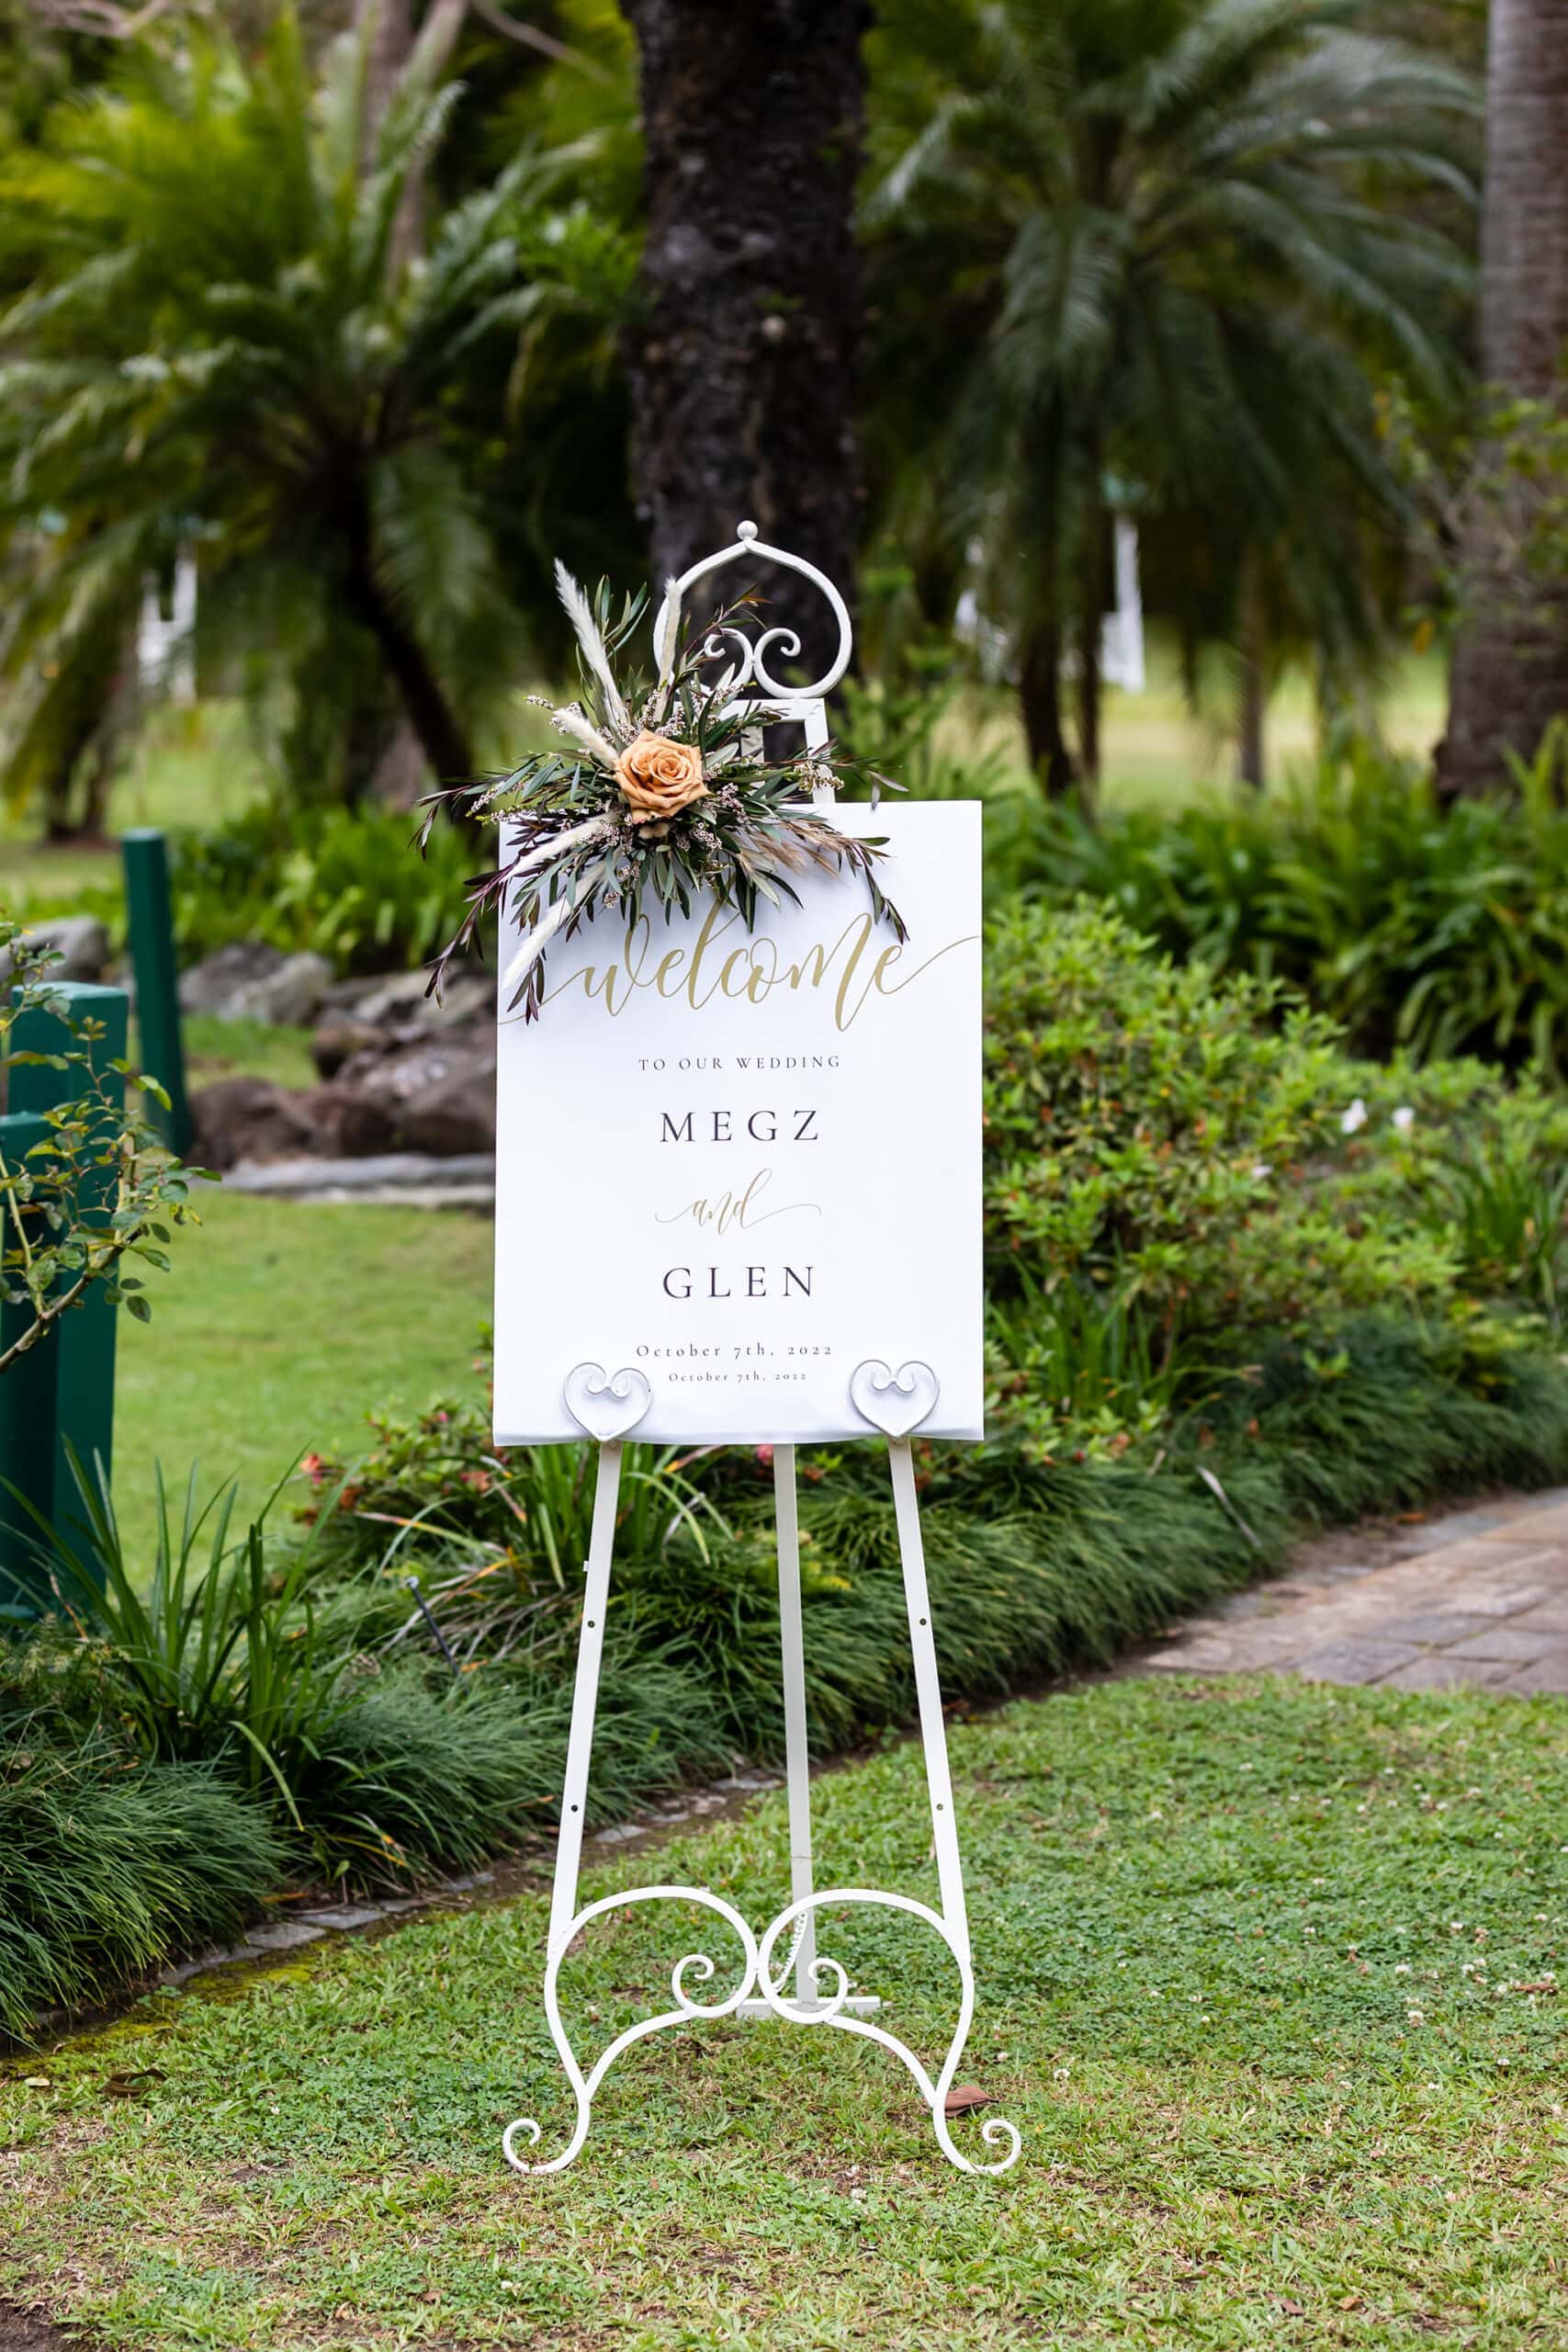 Coolibah Downs Private Estate Wedding Ceremony lawn